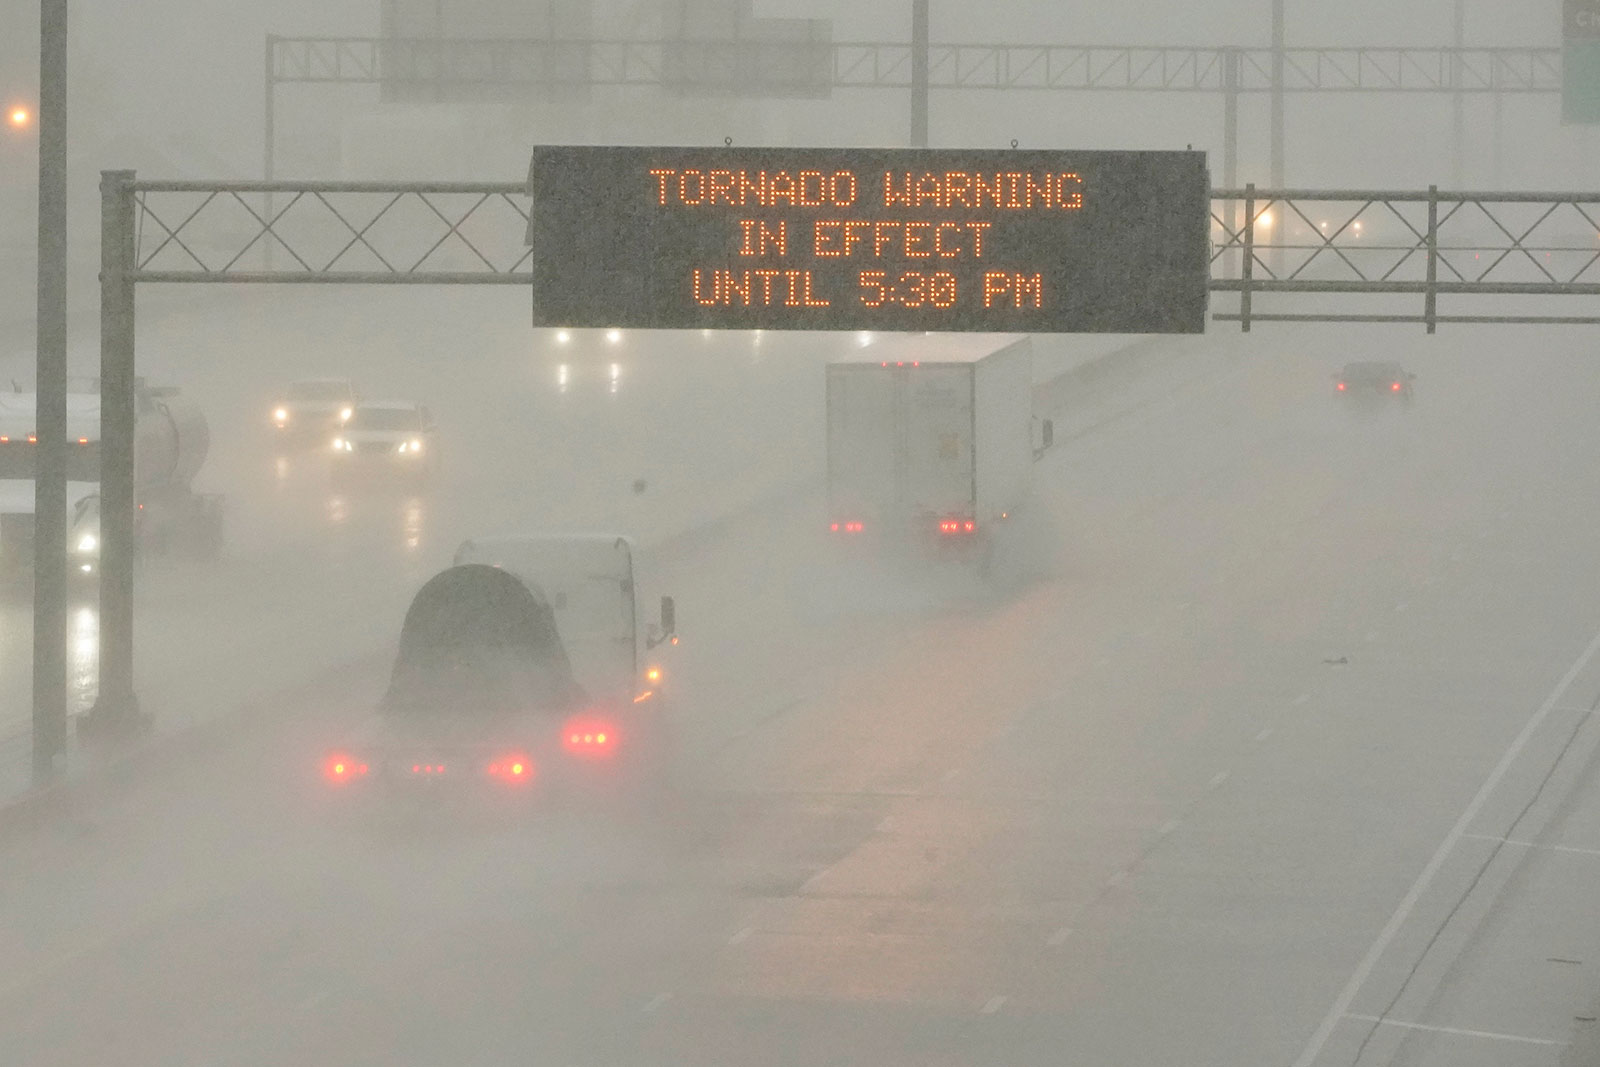 The Mississippi Department of Transportation digital message board warns drivers along I-55 southbound in Jackson of a tornado warning during a rainstorm on Wednesday.